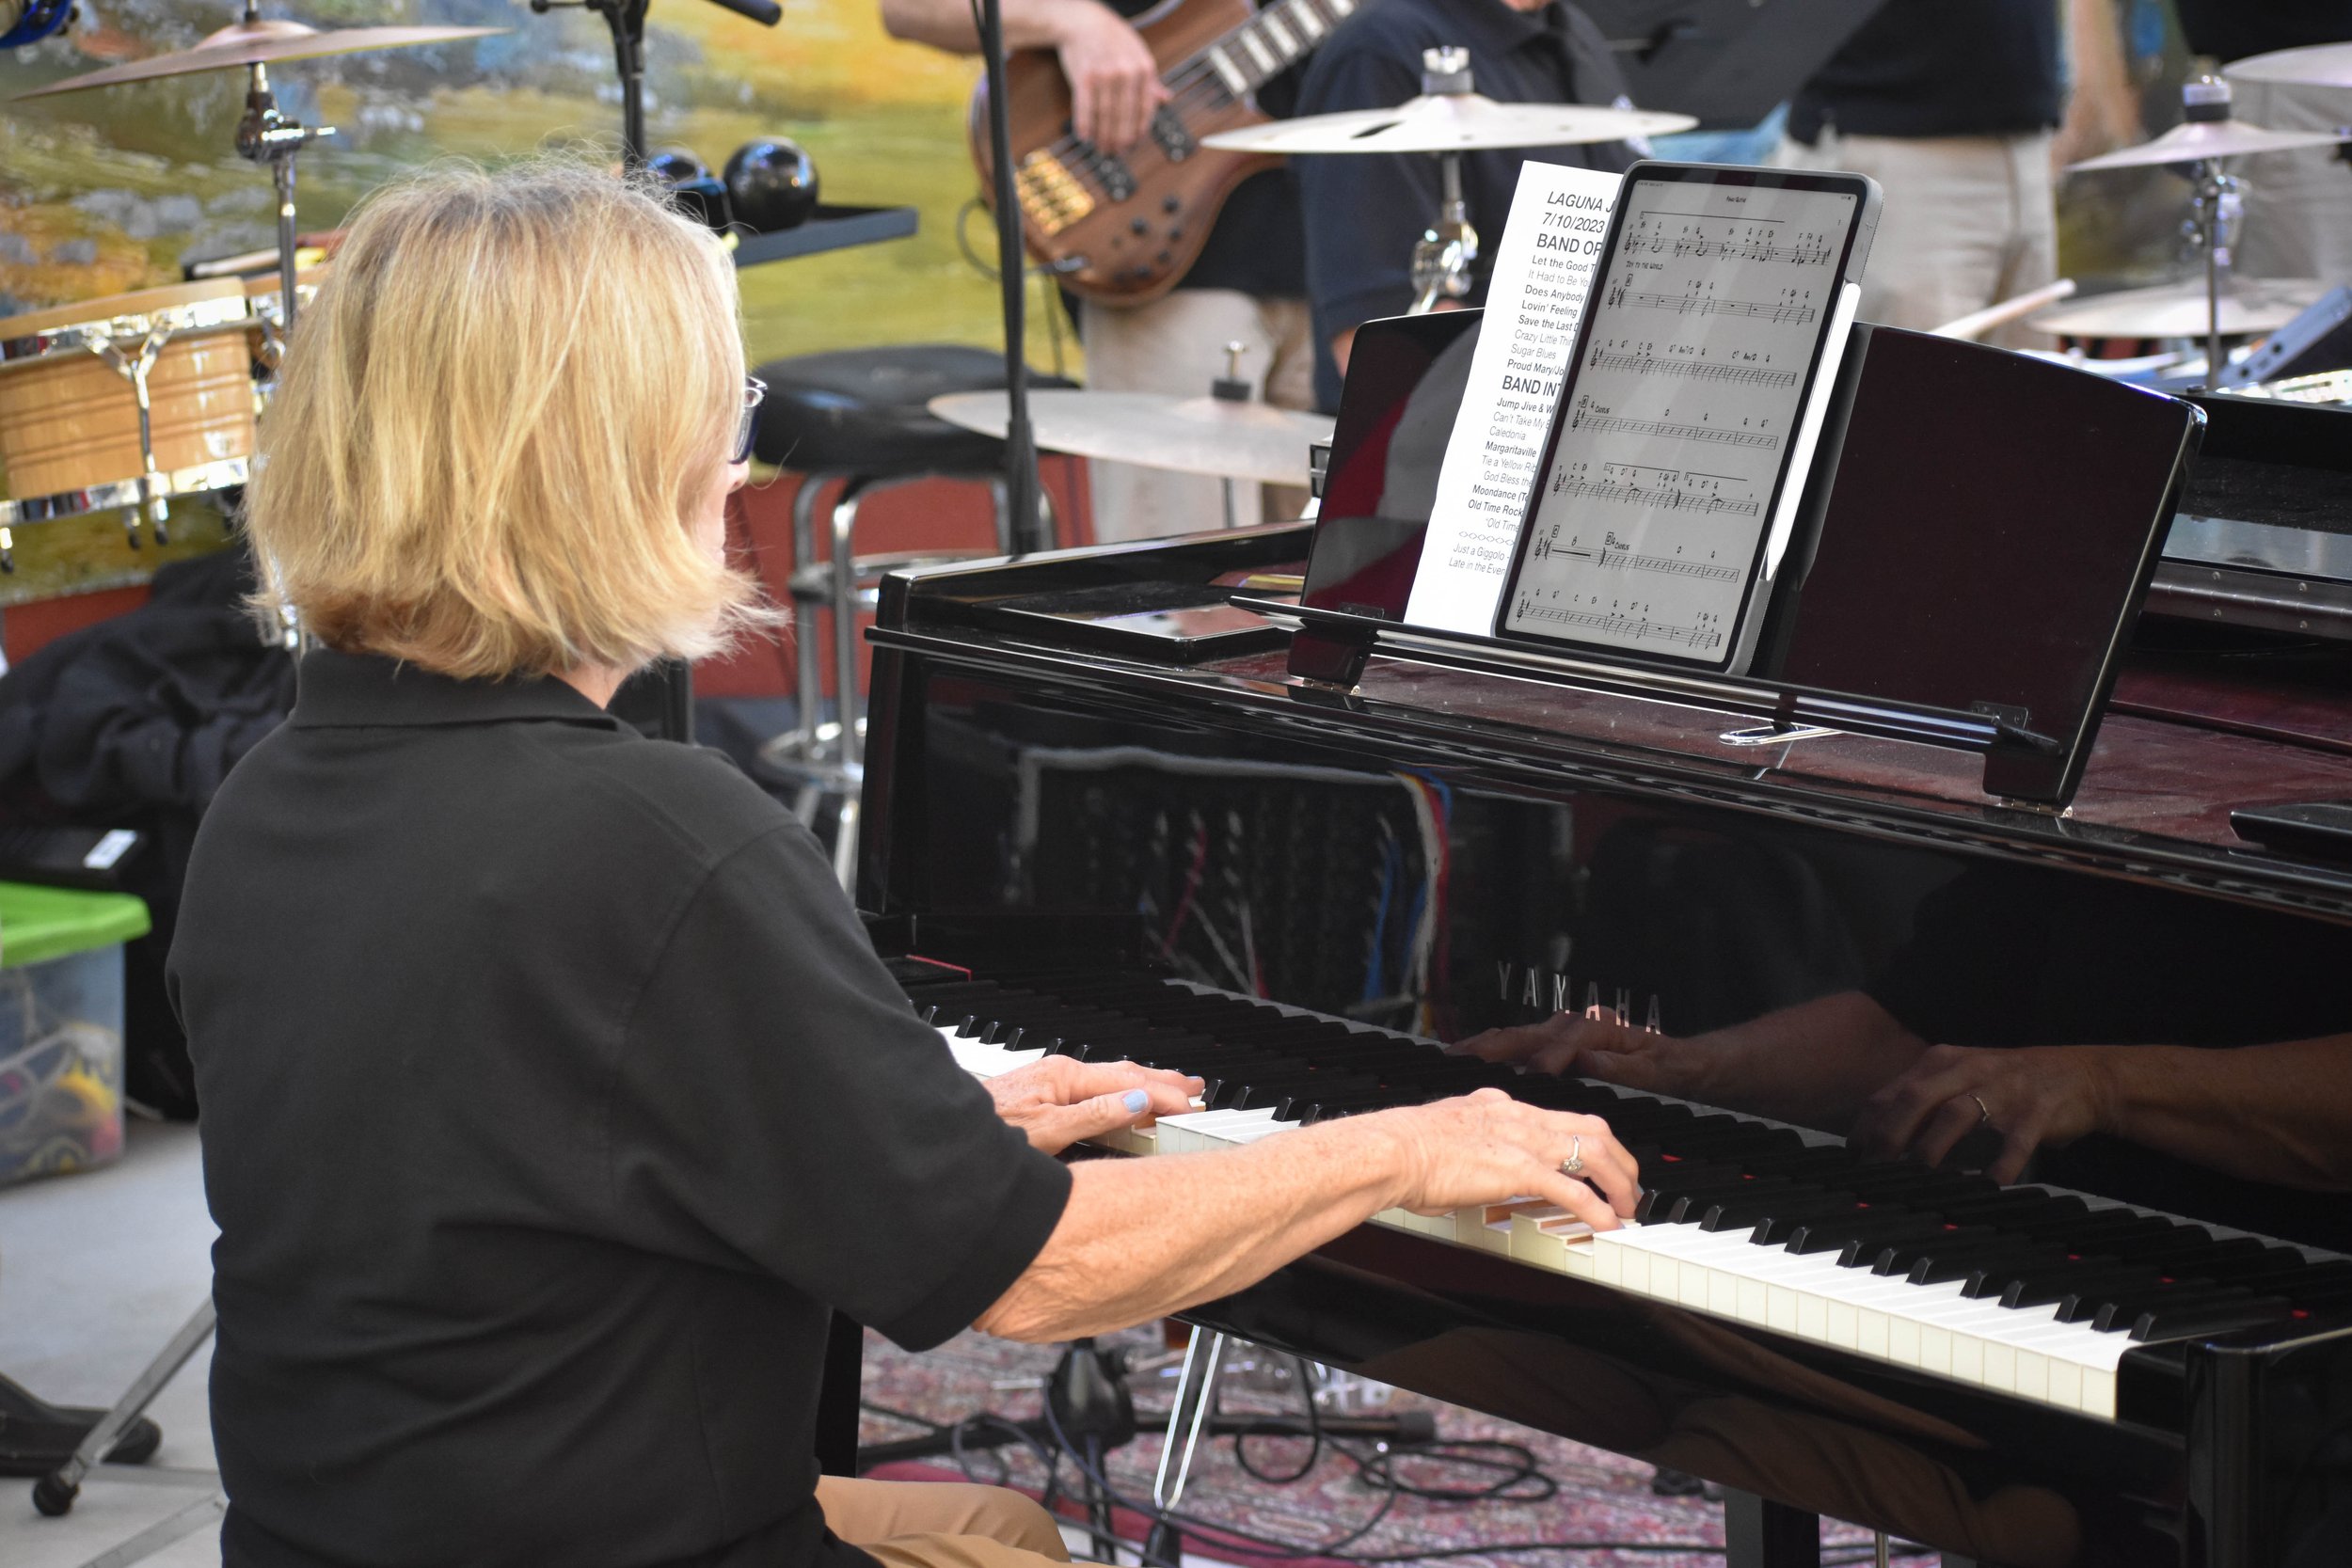 07-10-2023 Laguna Jazz Band concert at Pageant of the Masters by Peyton Webster58-54.jpg